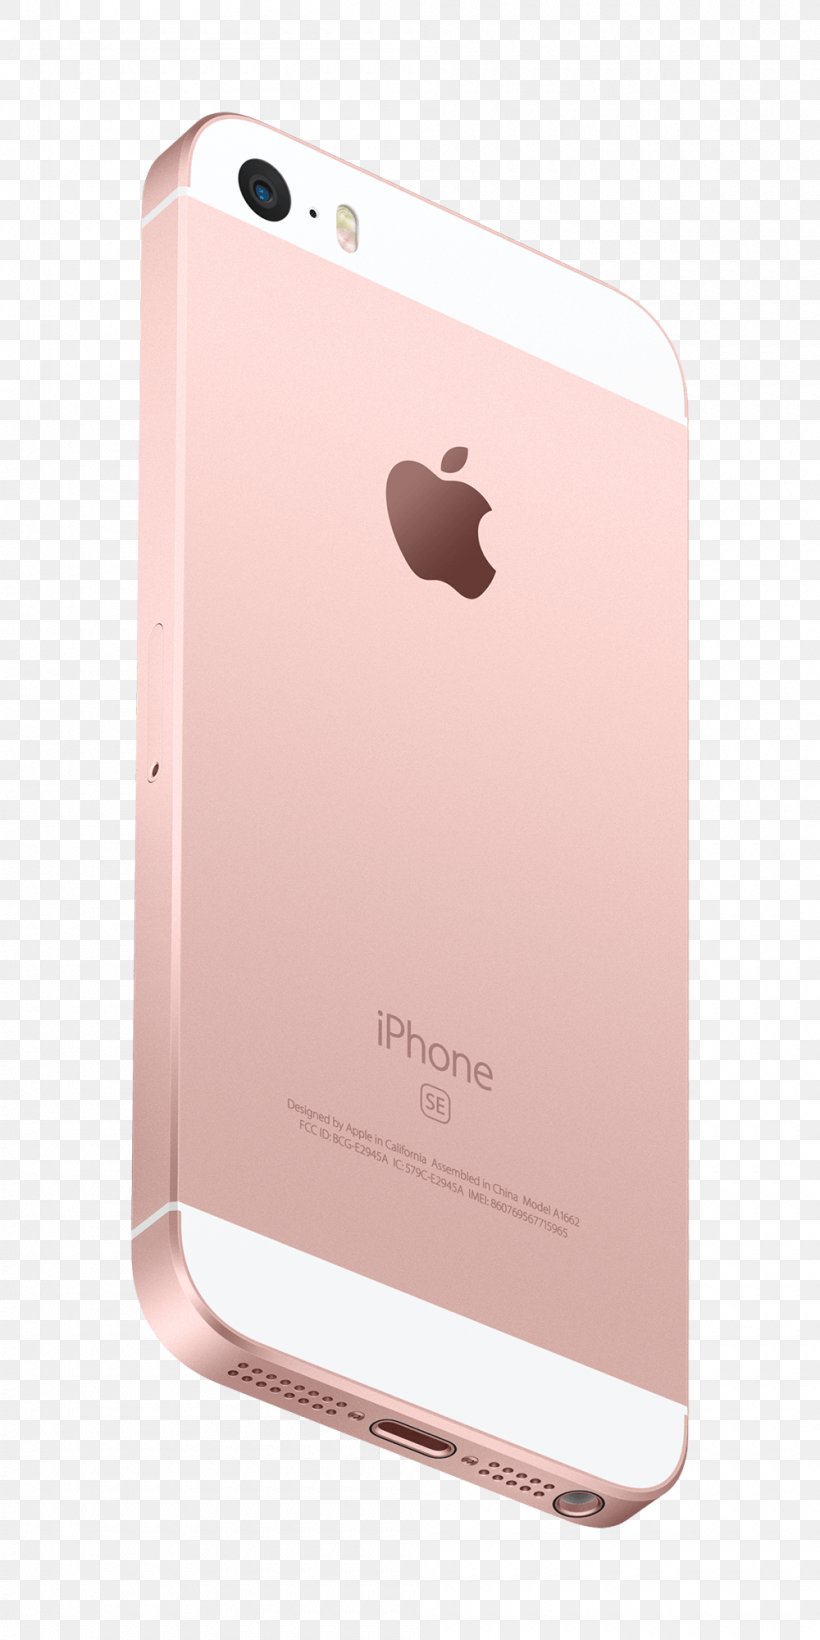 Iphone Se Iphone 4s Iphone 5s Apple Rose Gold Png 1000x00px Iphone Se Apple Gadget Iphone